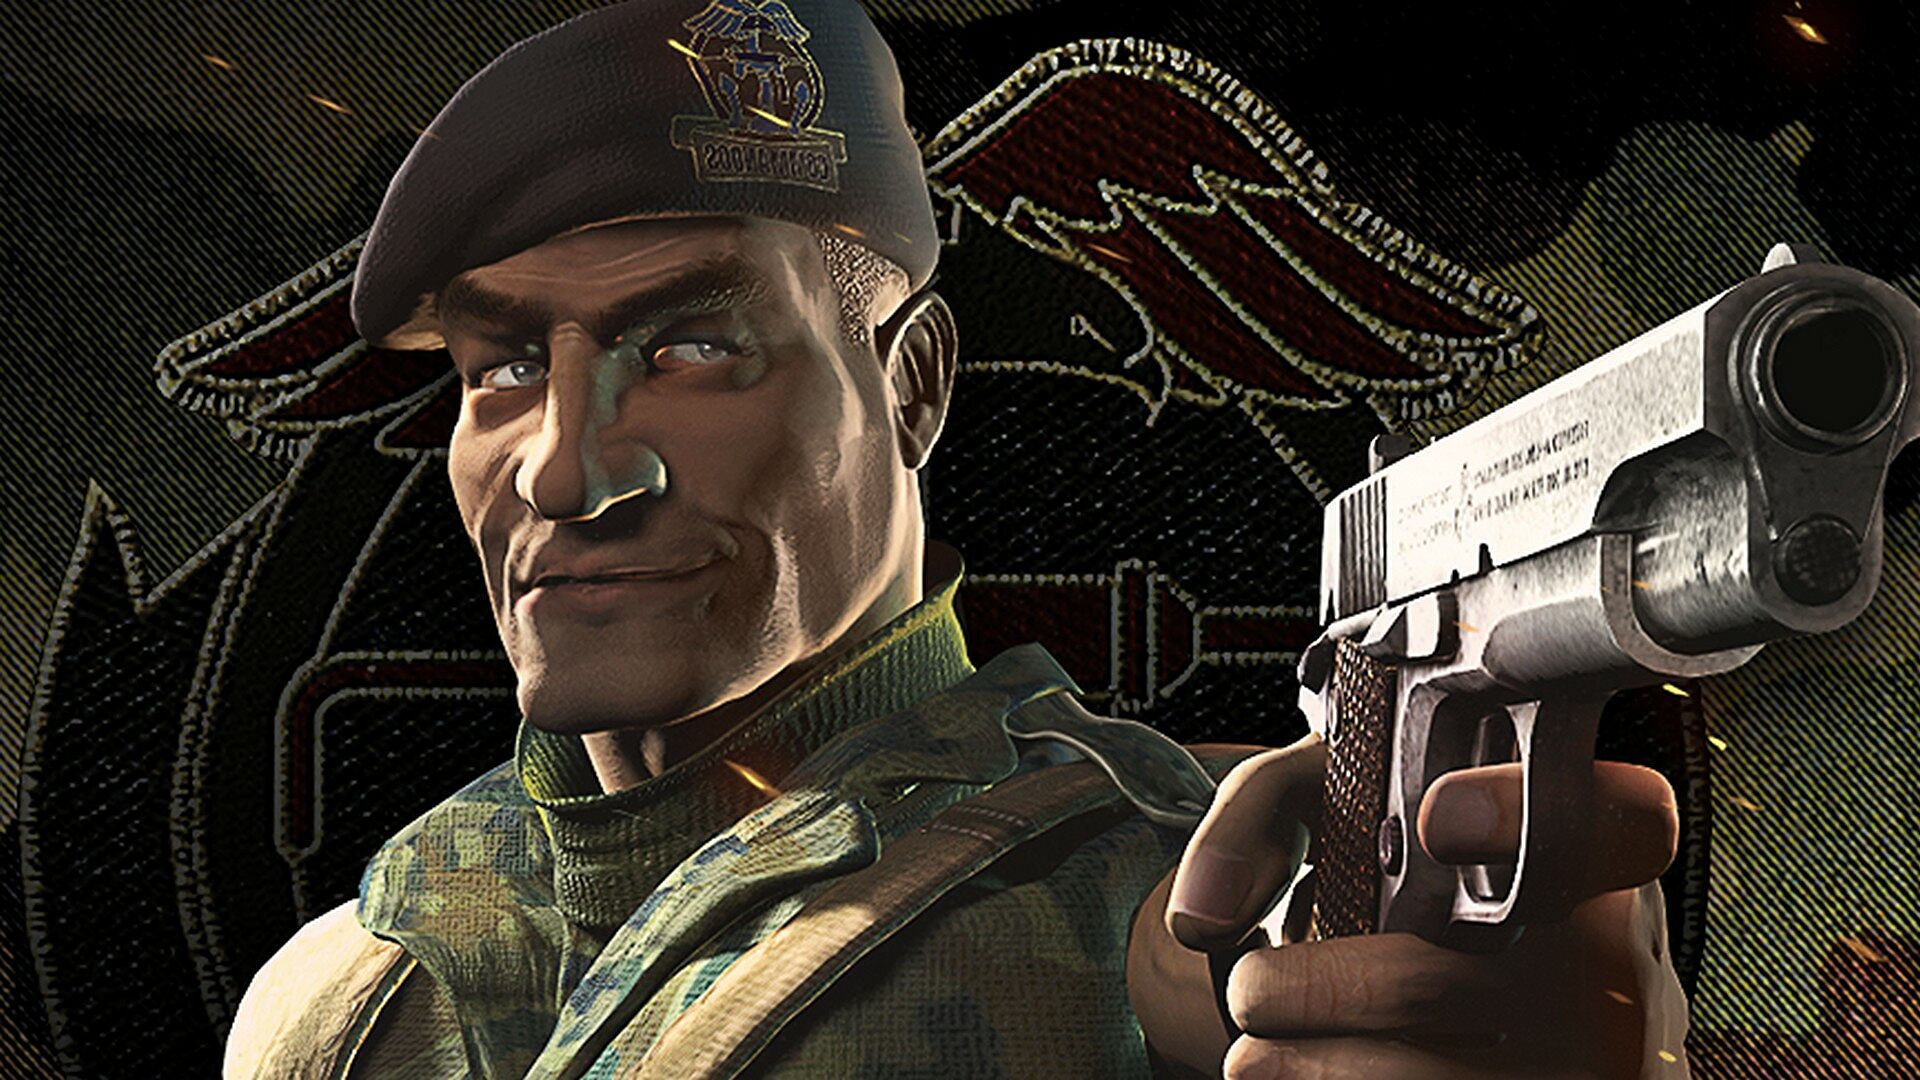 Commandos: Part Two & Part Three Remaster Dual Pack available in stores now